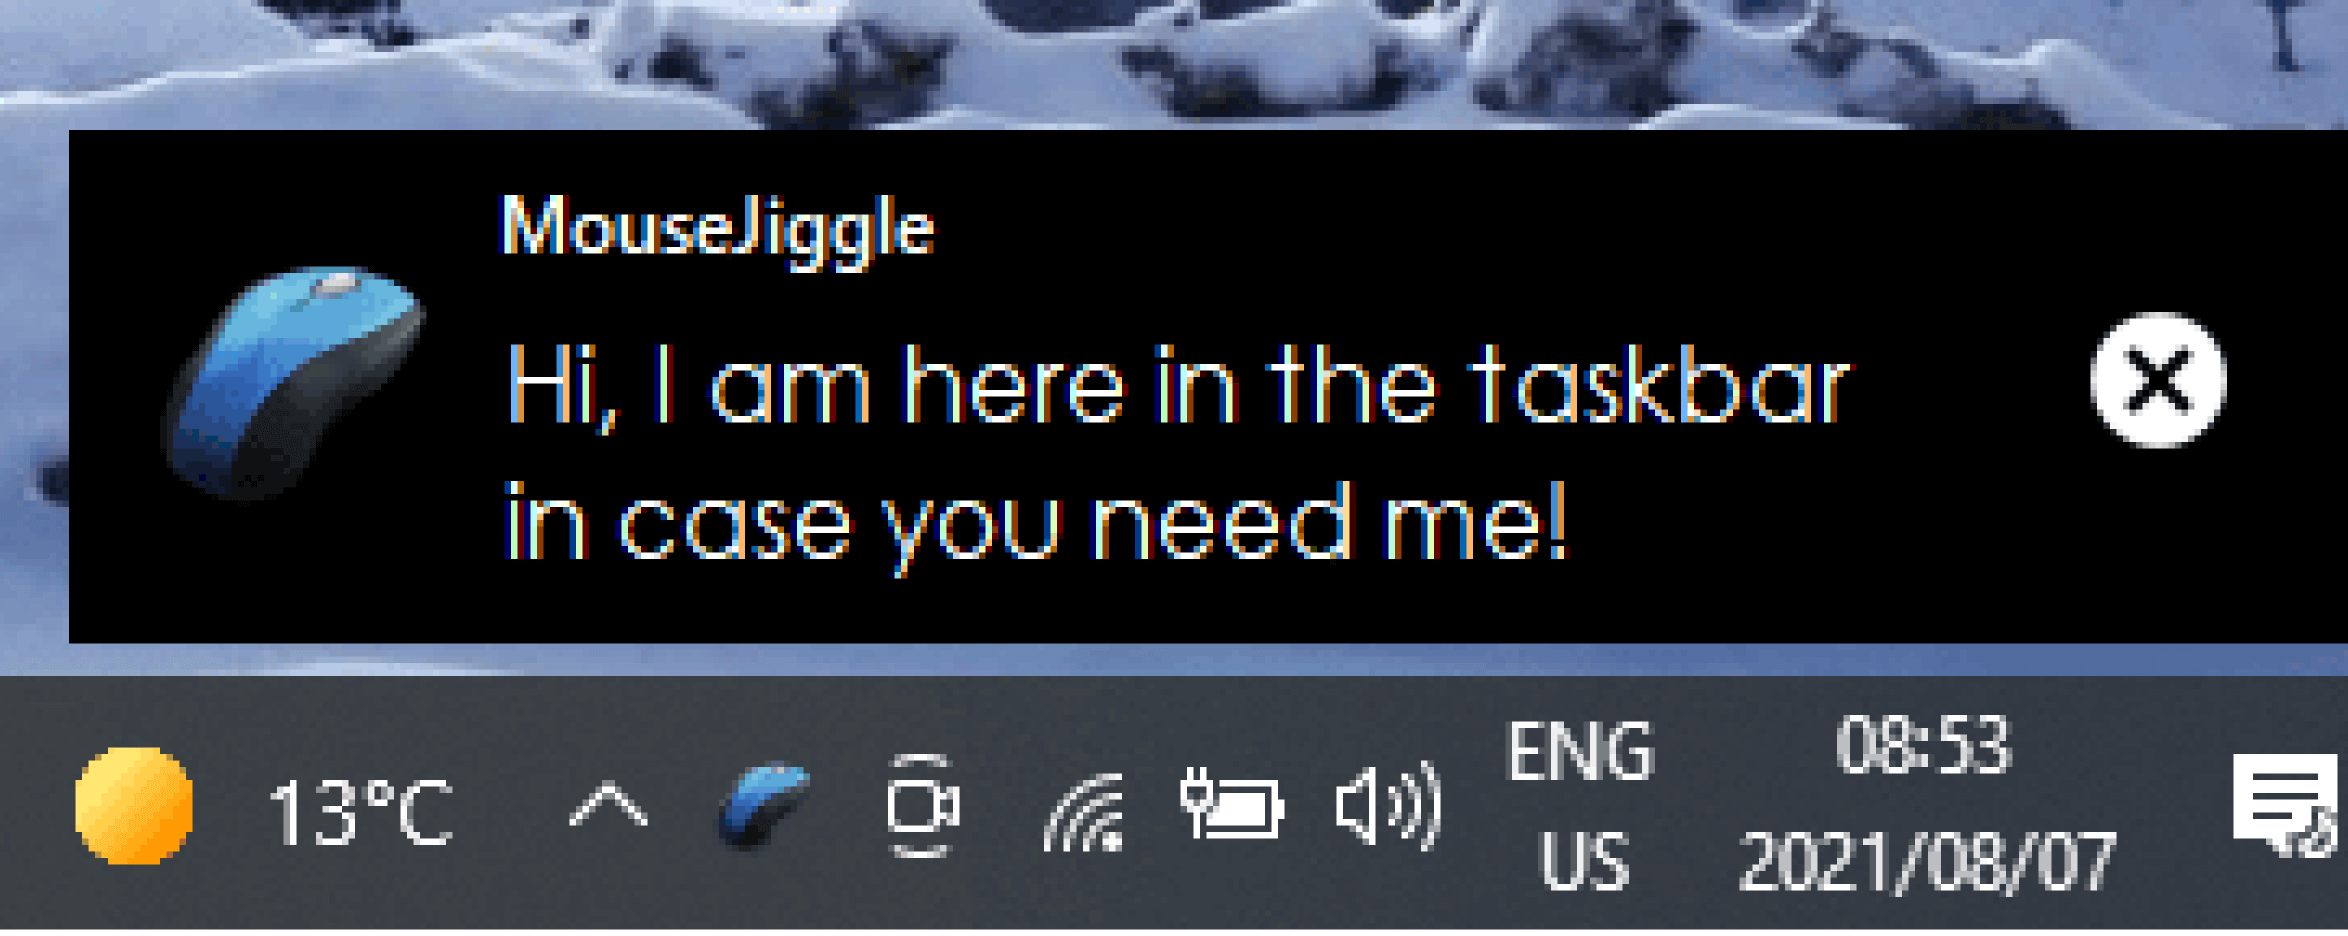 MouseJiggle will be installed in your task bar in the bottom right of your screen.